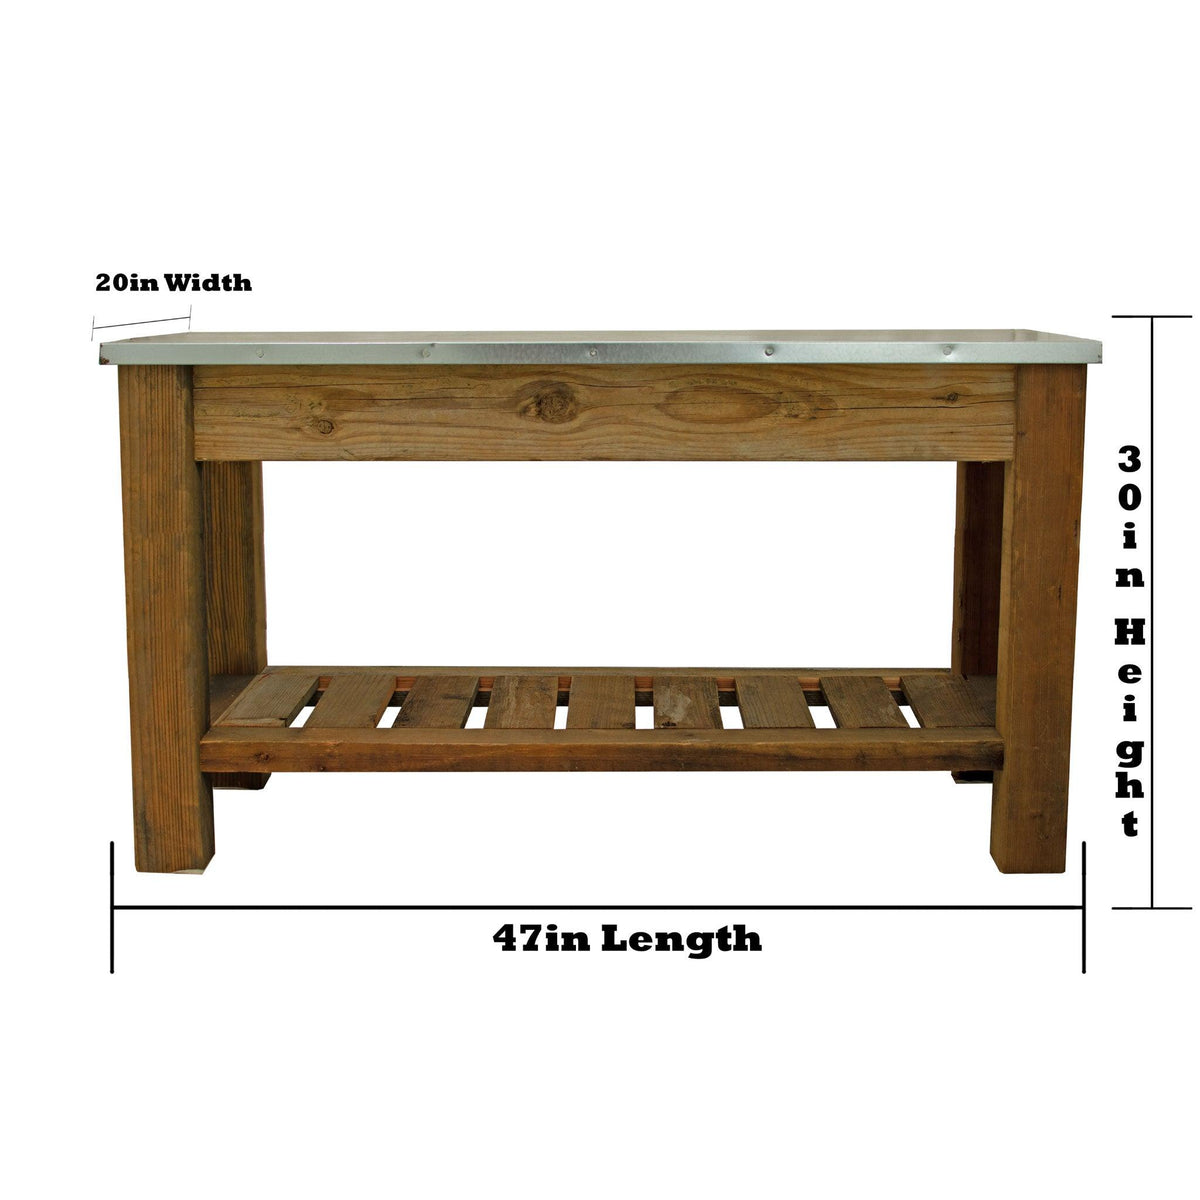 Dimensions of Lee Display's Redwood Outdoor Patio Console Table   Built by Lee Display & Made in the USA.  On sale now at leedisplay.com.